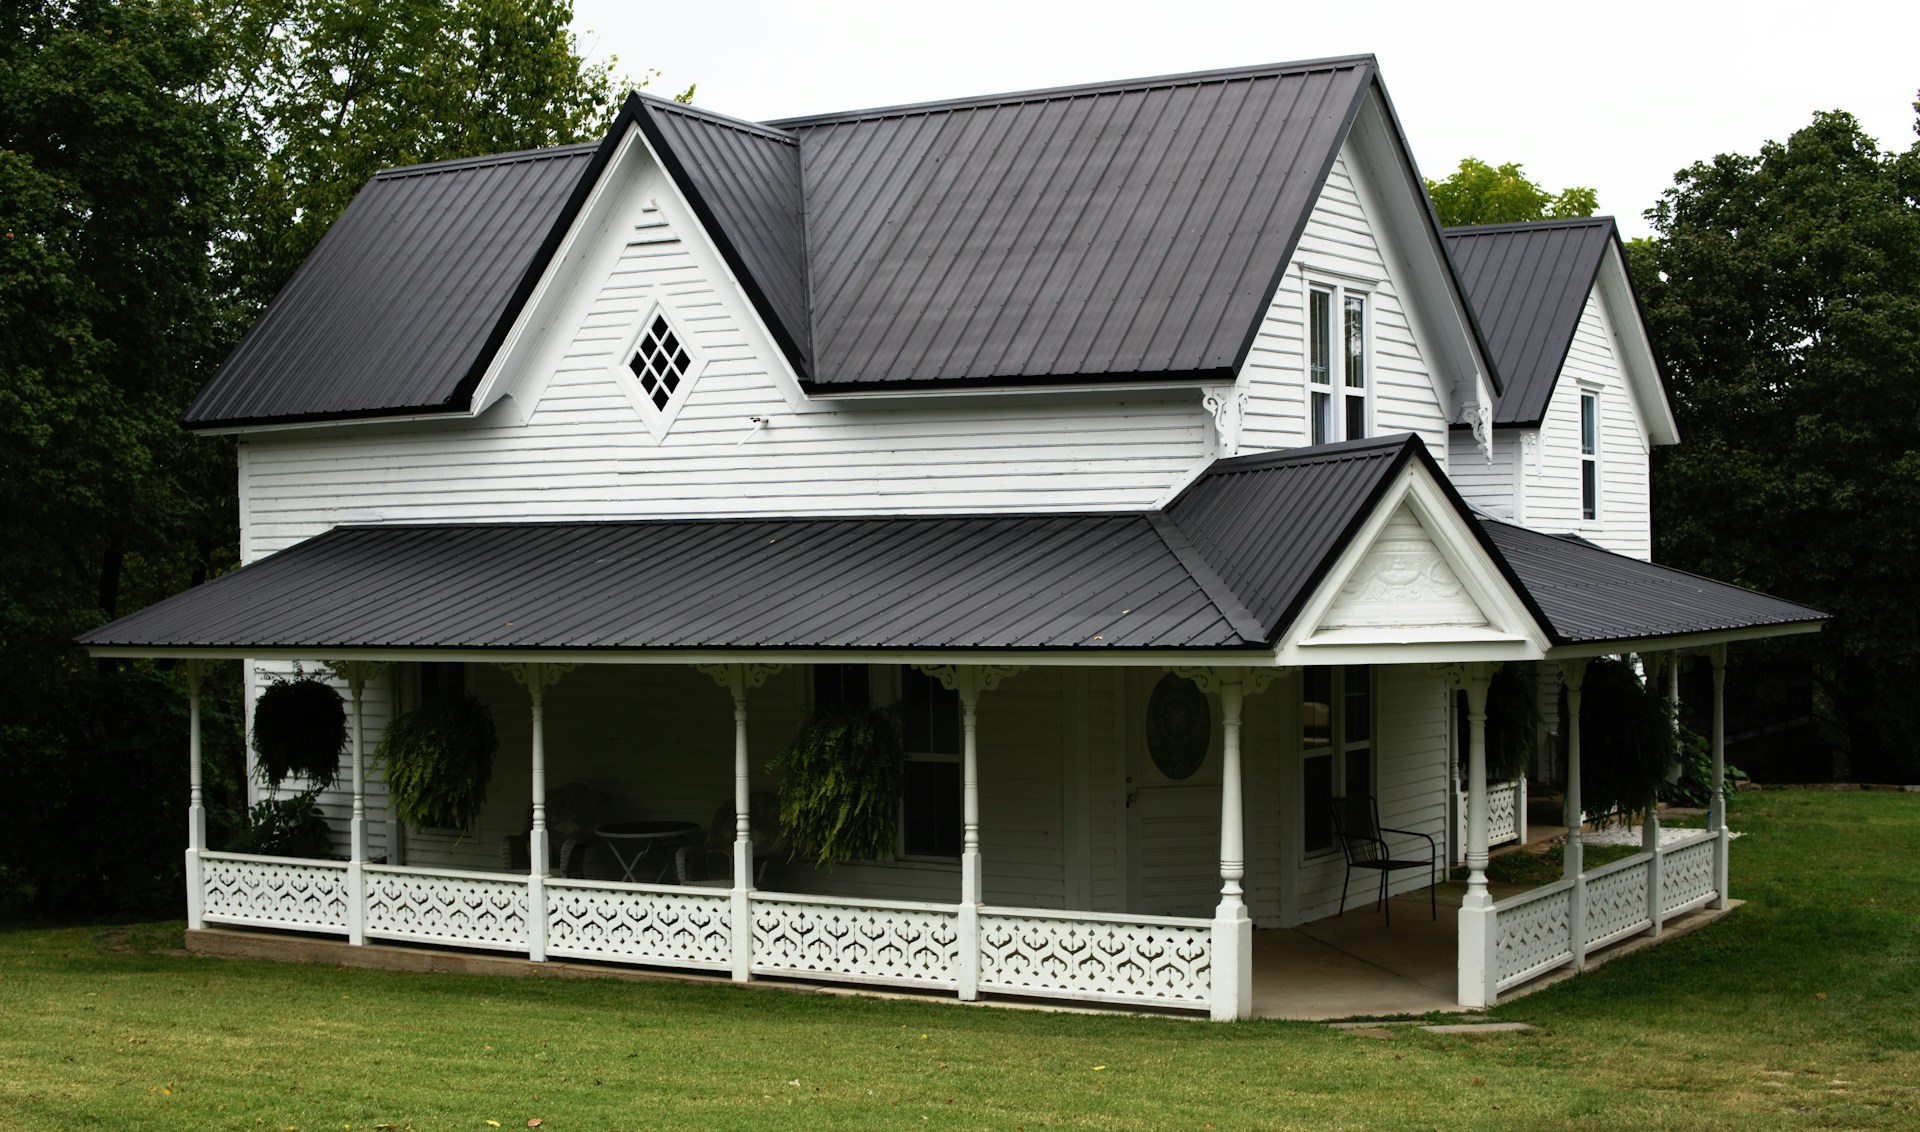 Large white house with black roof